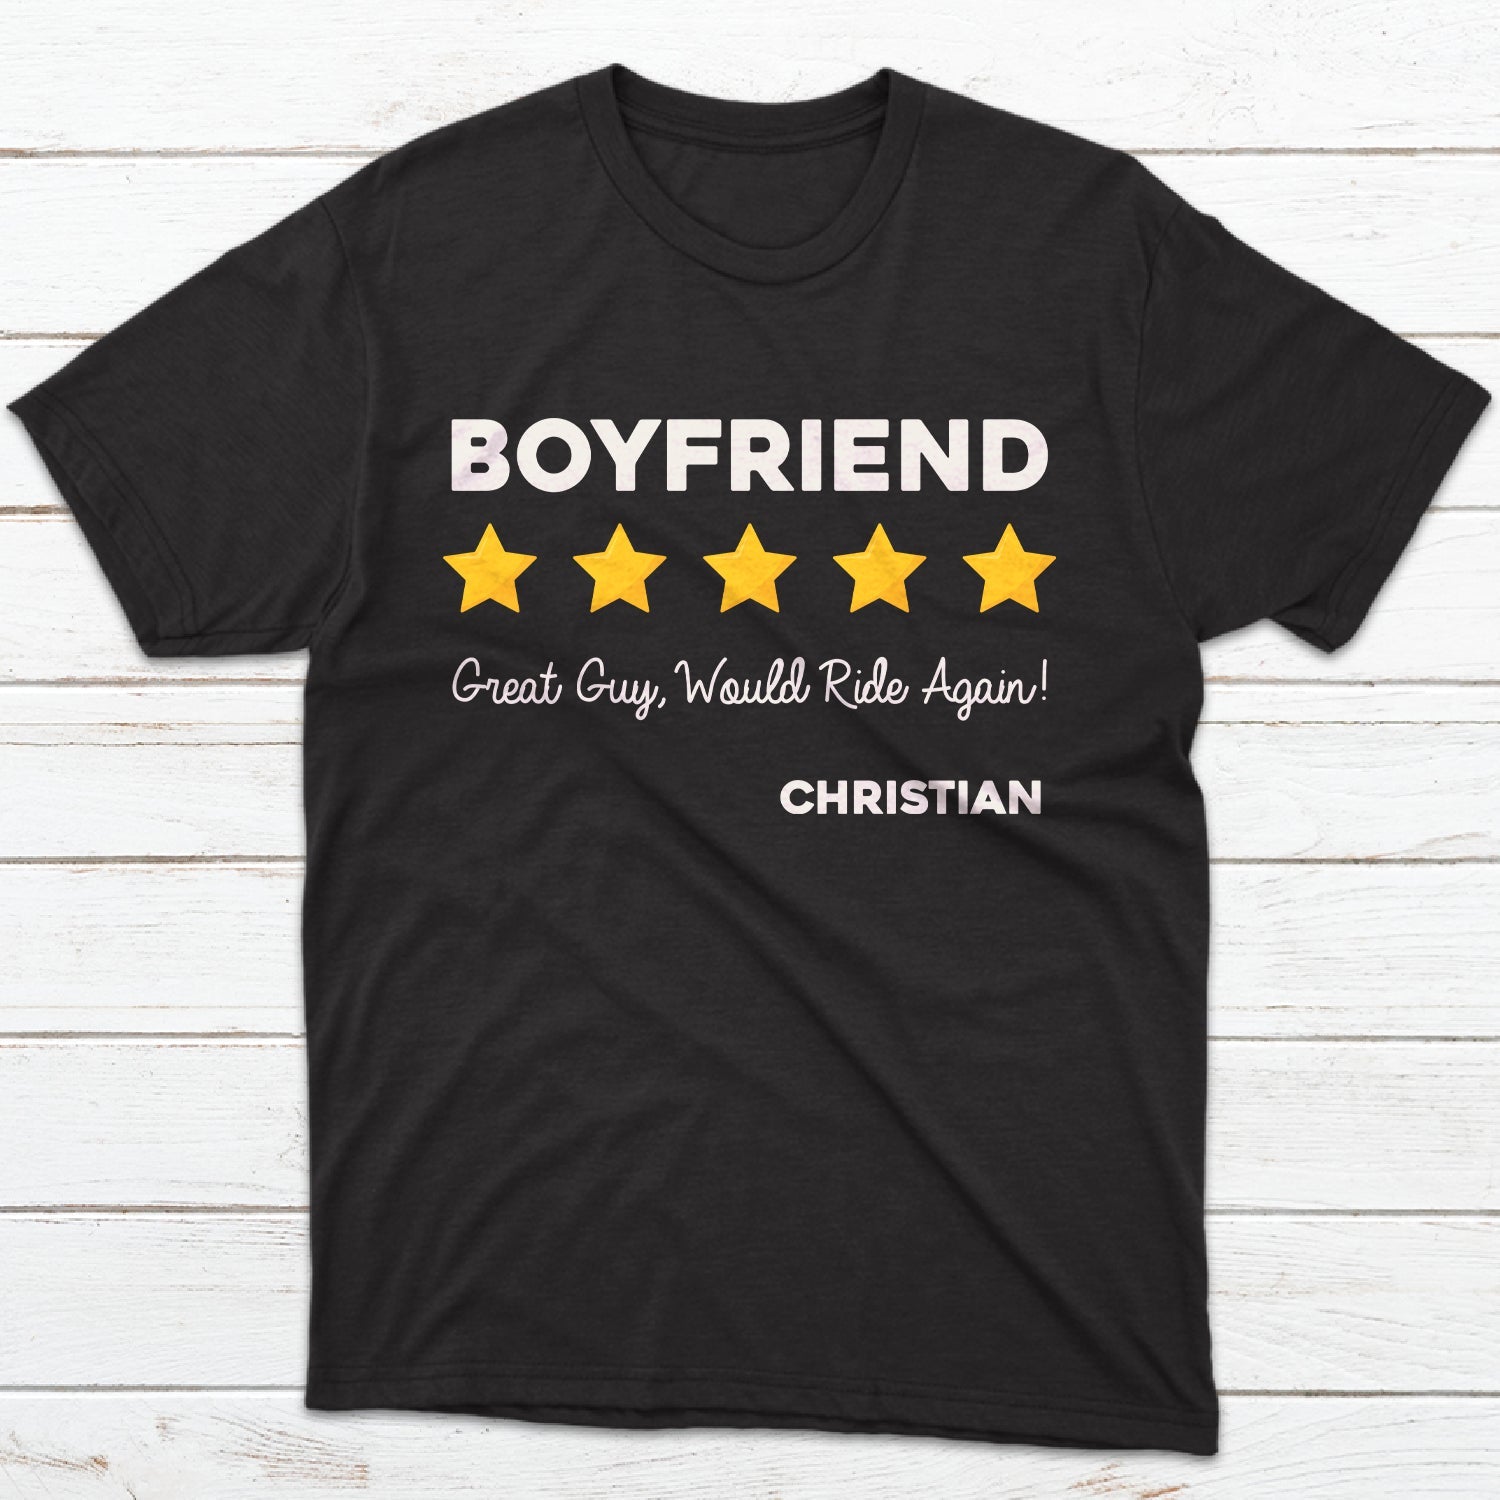 Five Stars, Review, Personalized Shirt